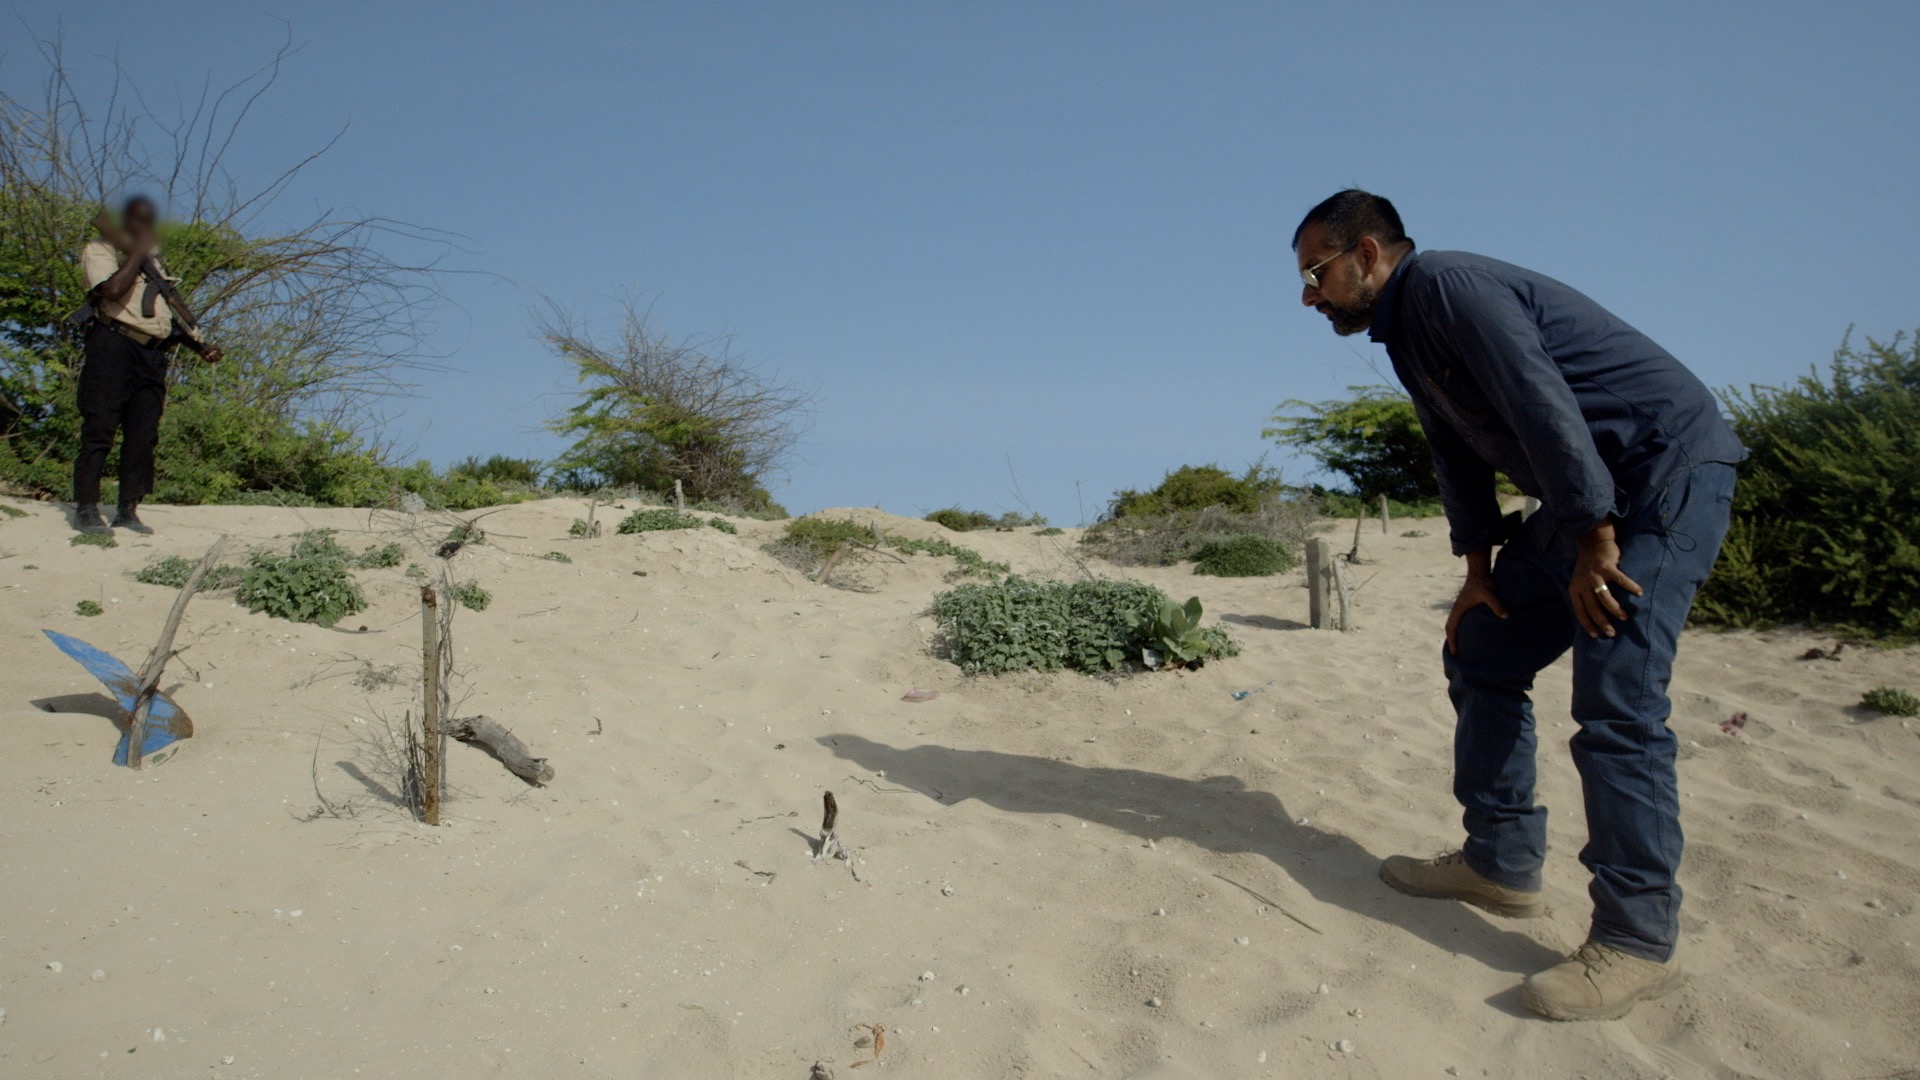 On a sandy bank, markers indicate where al Shabaab victims were buried after being executed.